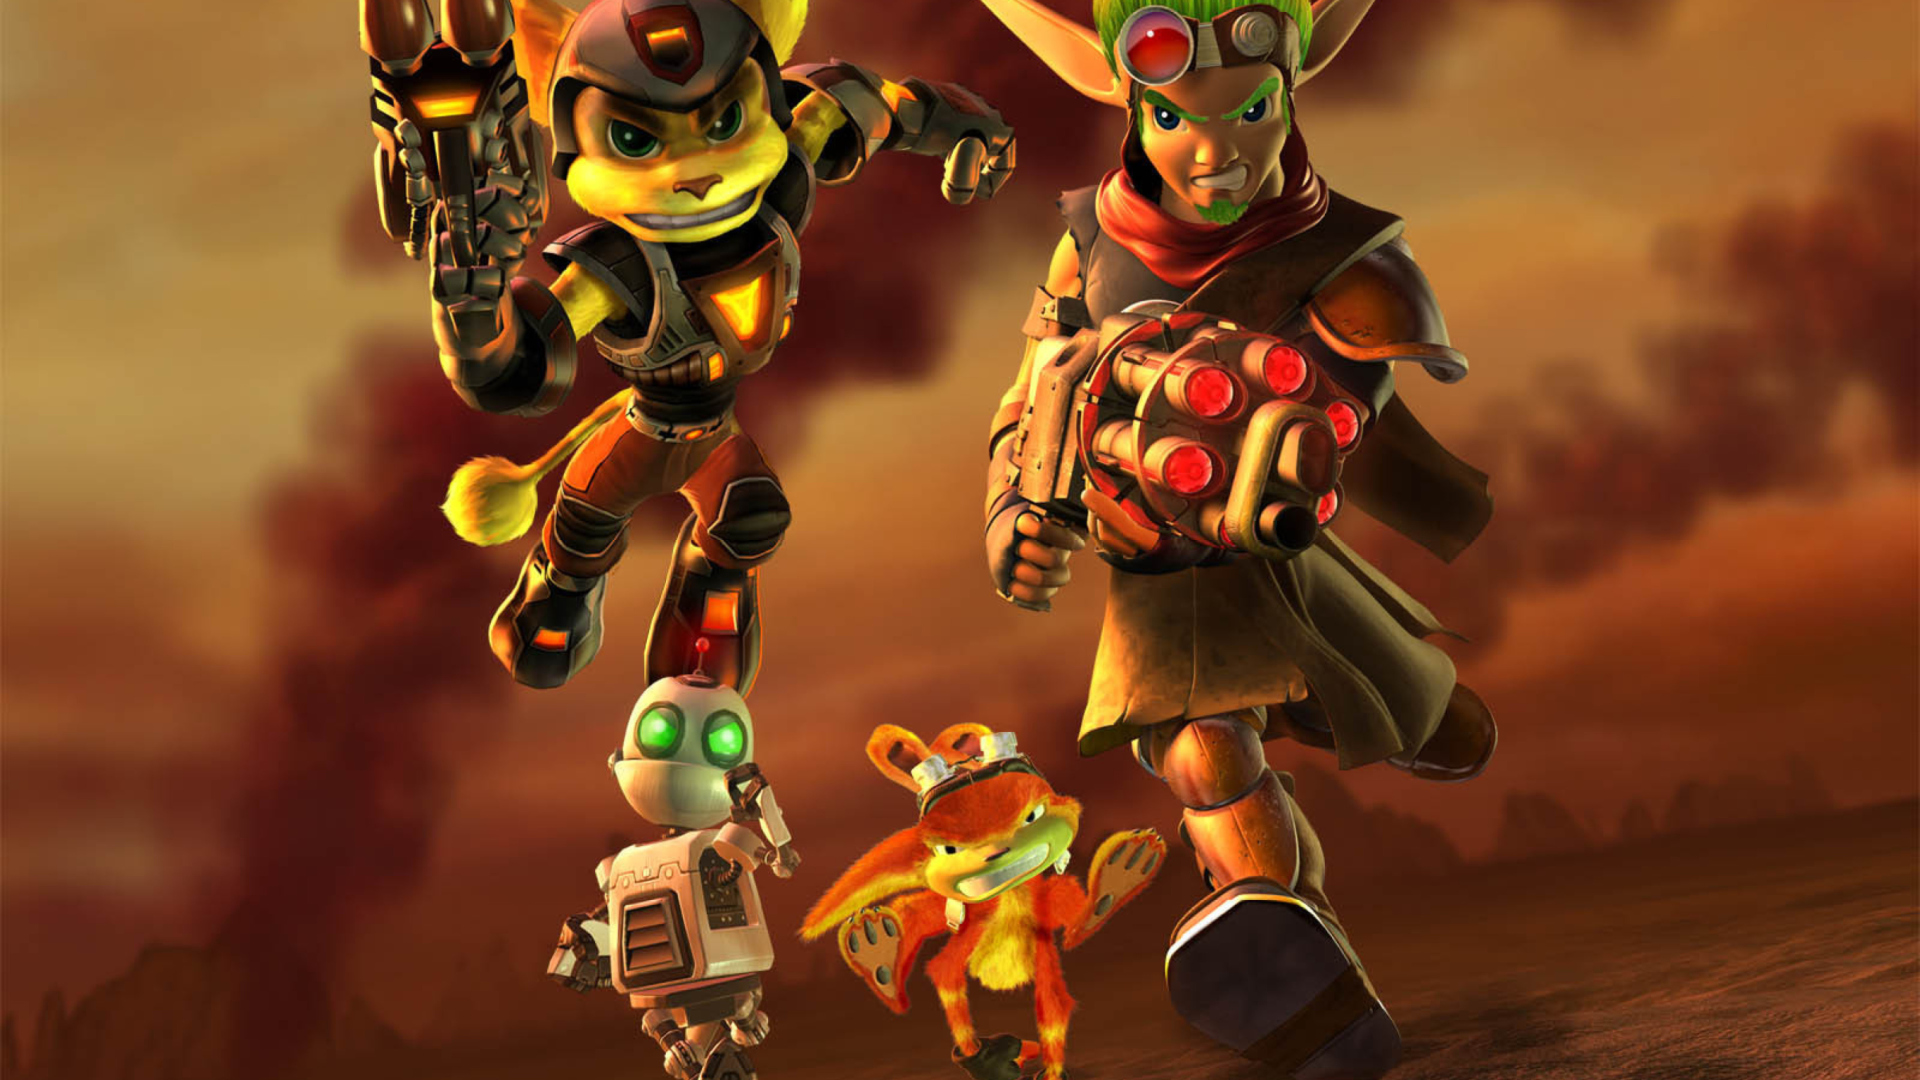 Das Jak and Daxter - Ratchet and Clank Wallpaper 1920x1080